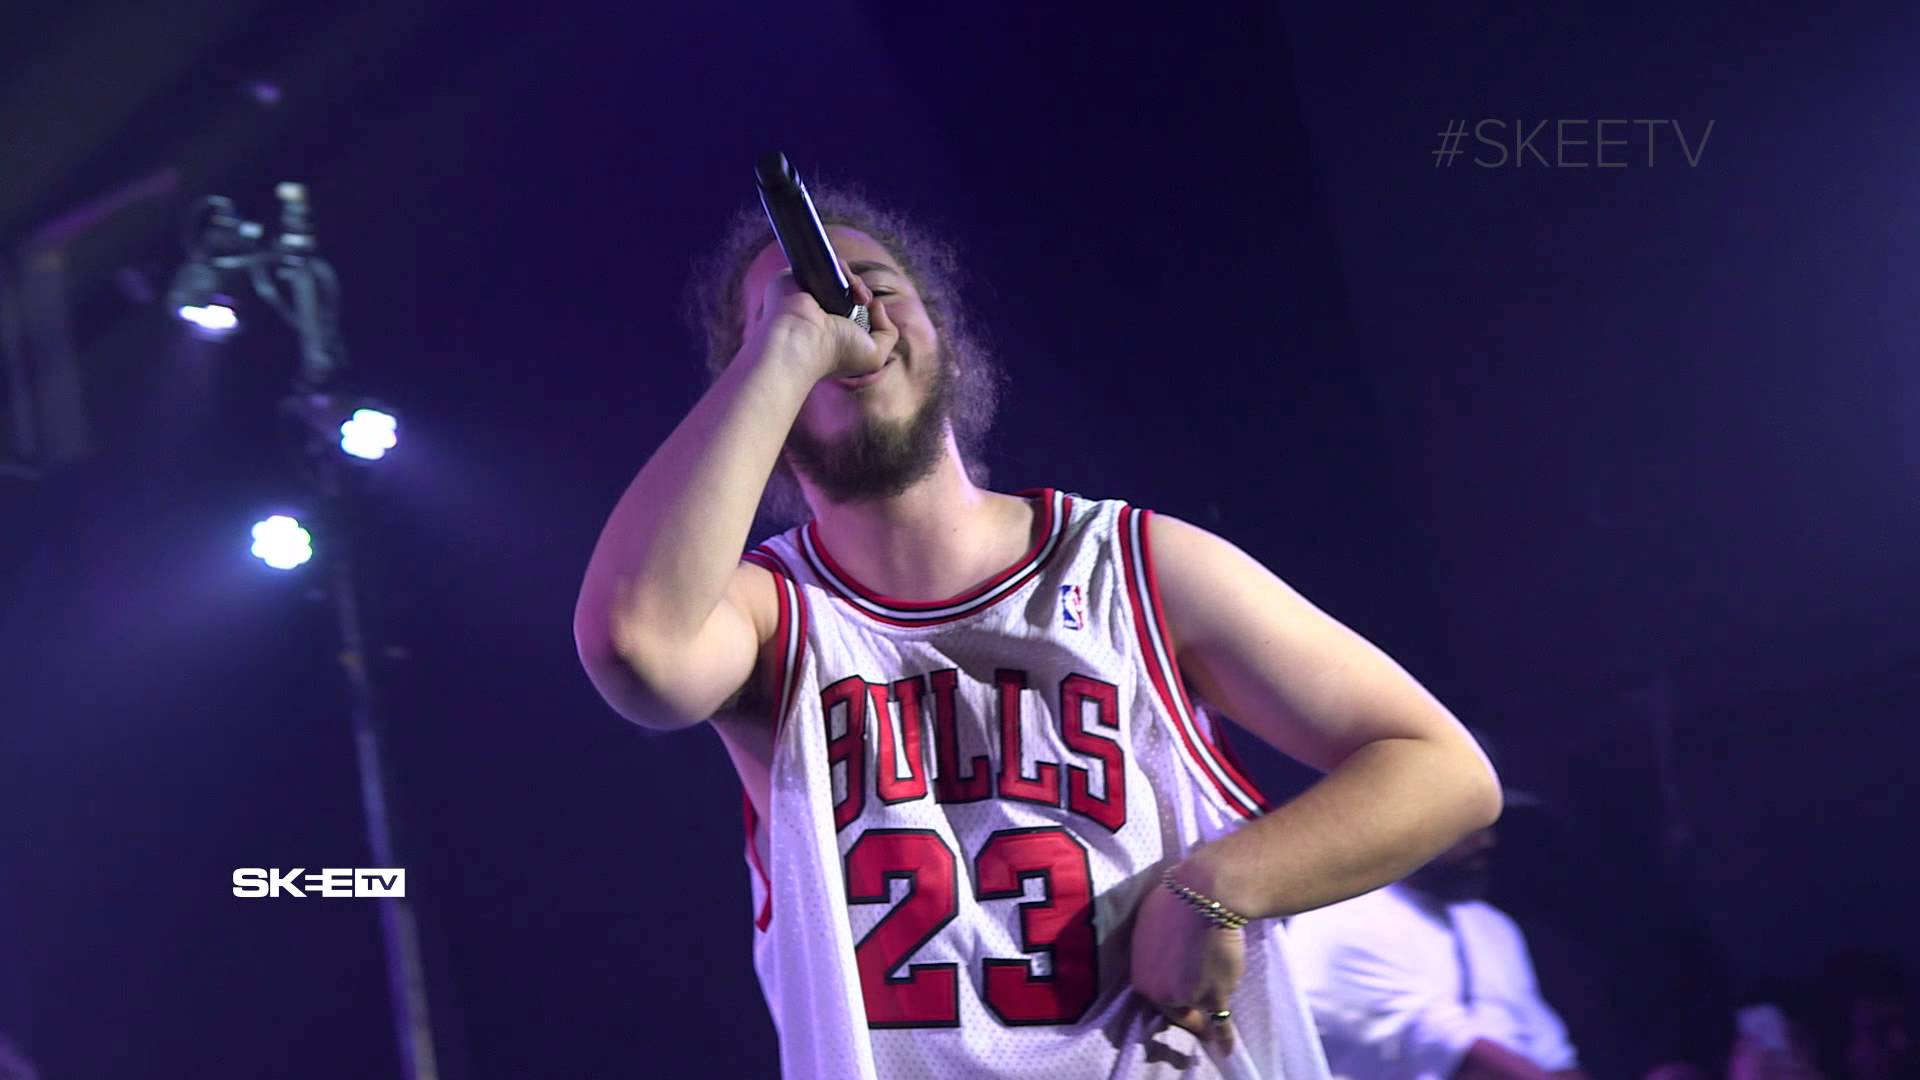 Post Malone White Iverson Live On Skee Tv